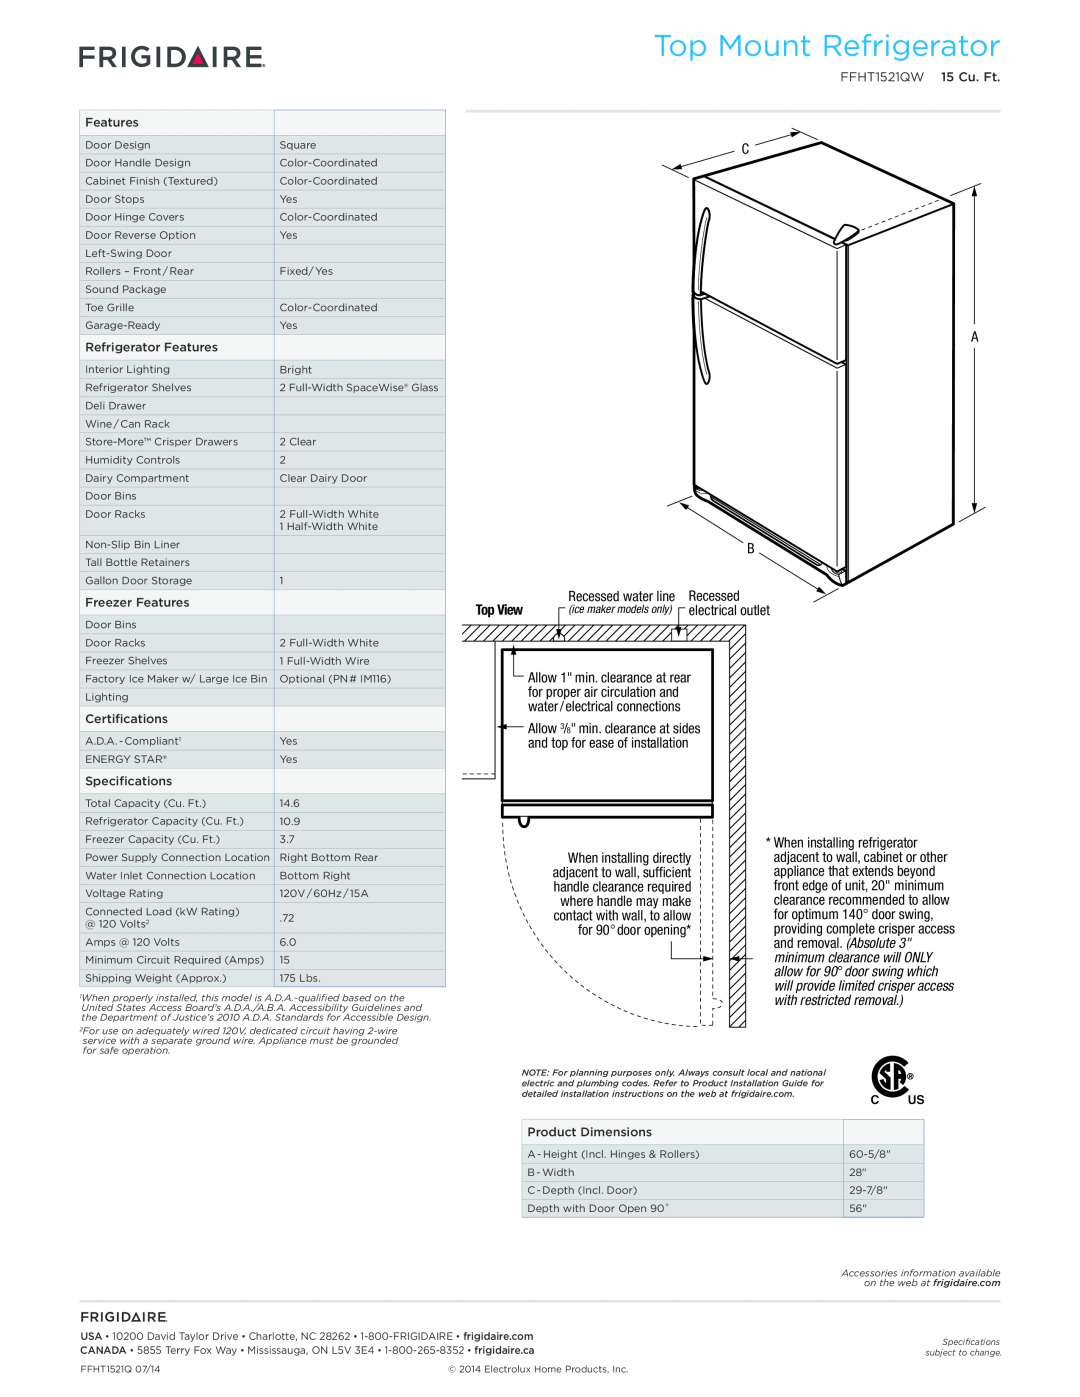 Frigidaire FFHT1521QW dimensions Top Mount Refrigerator, Top View, When installing refrigerator, for 90 door opening 